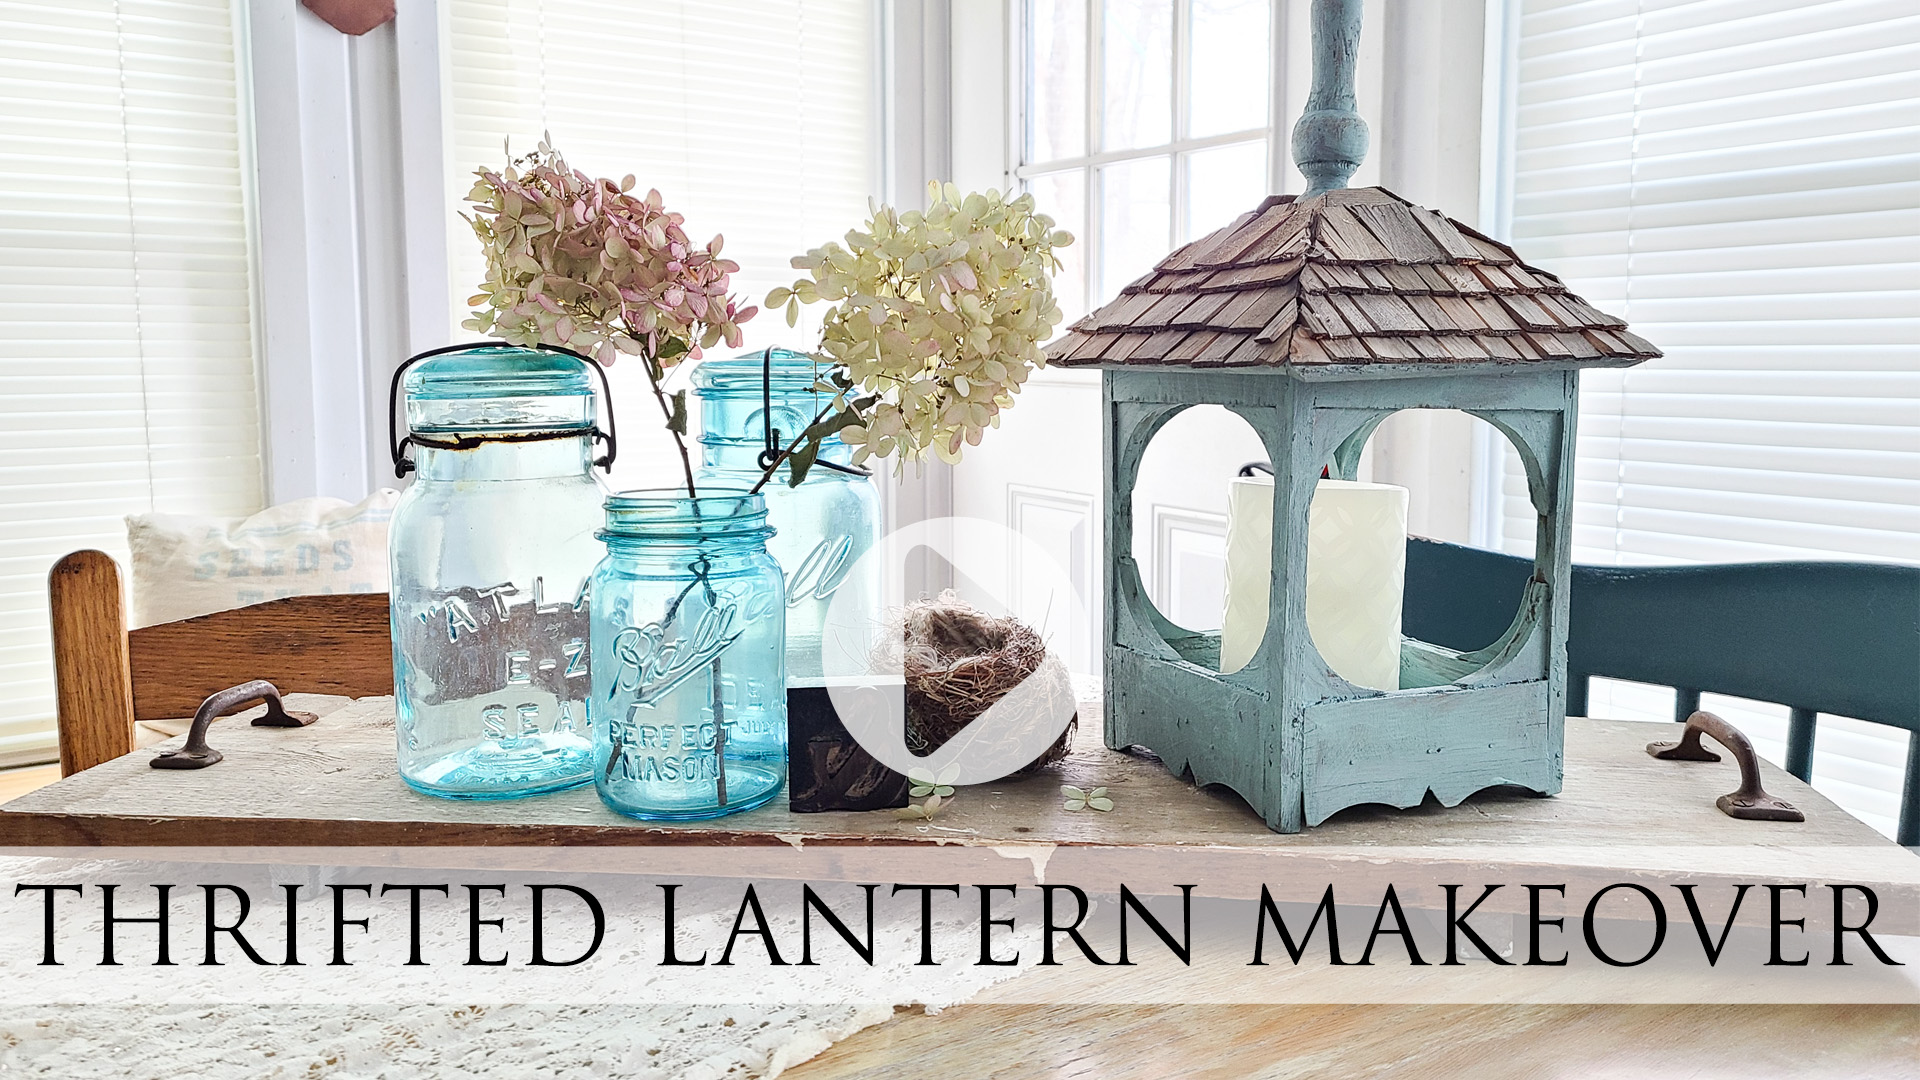 A thrifted lantern makeover video tutorial by Larissa of Prodigal Pieces | prodigalpieces.com #prodigalpieces